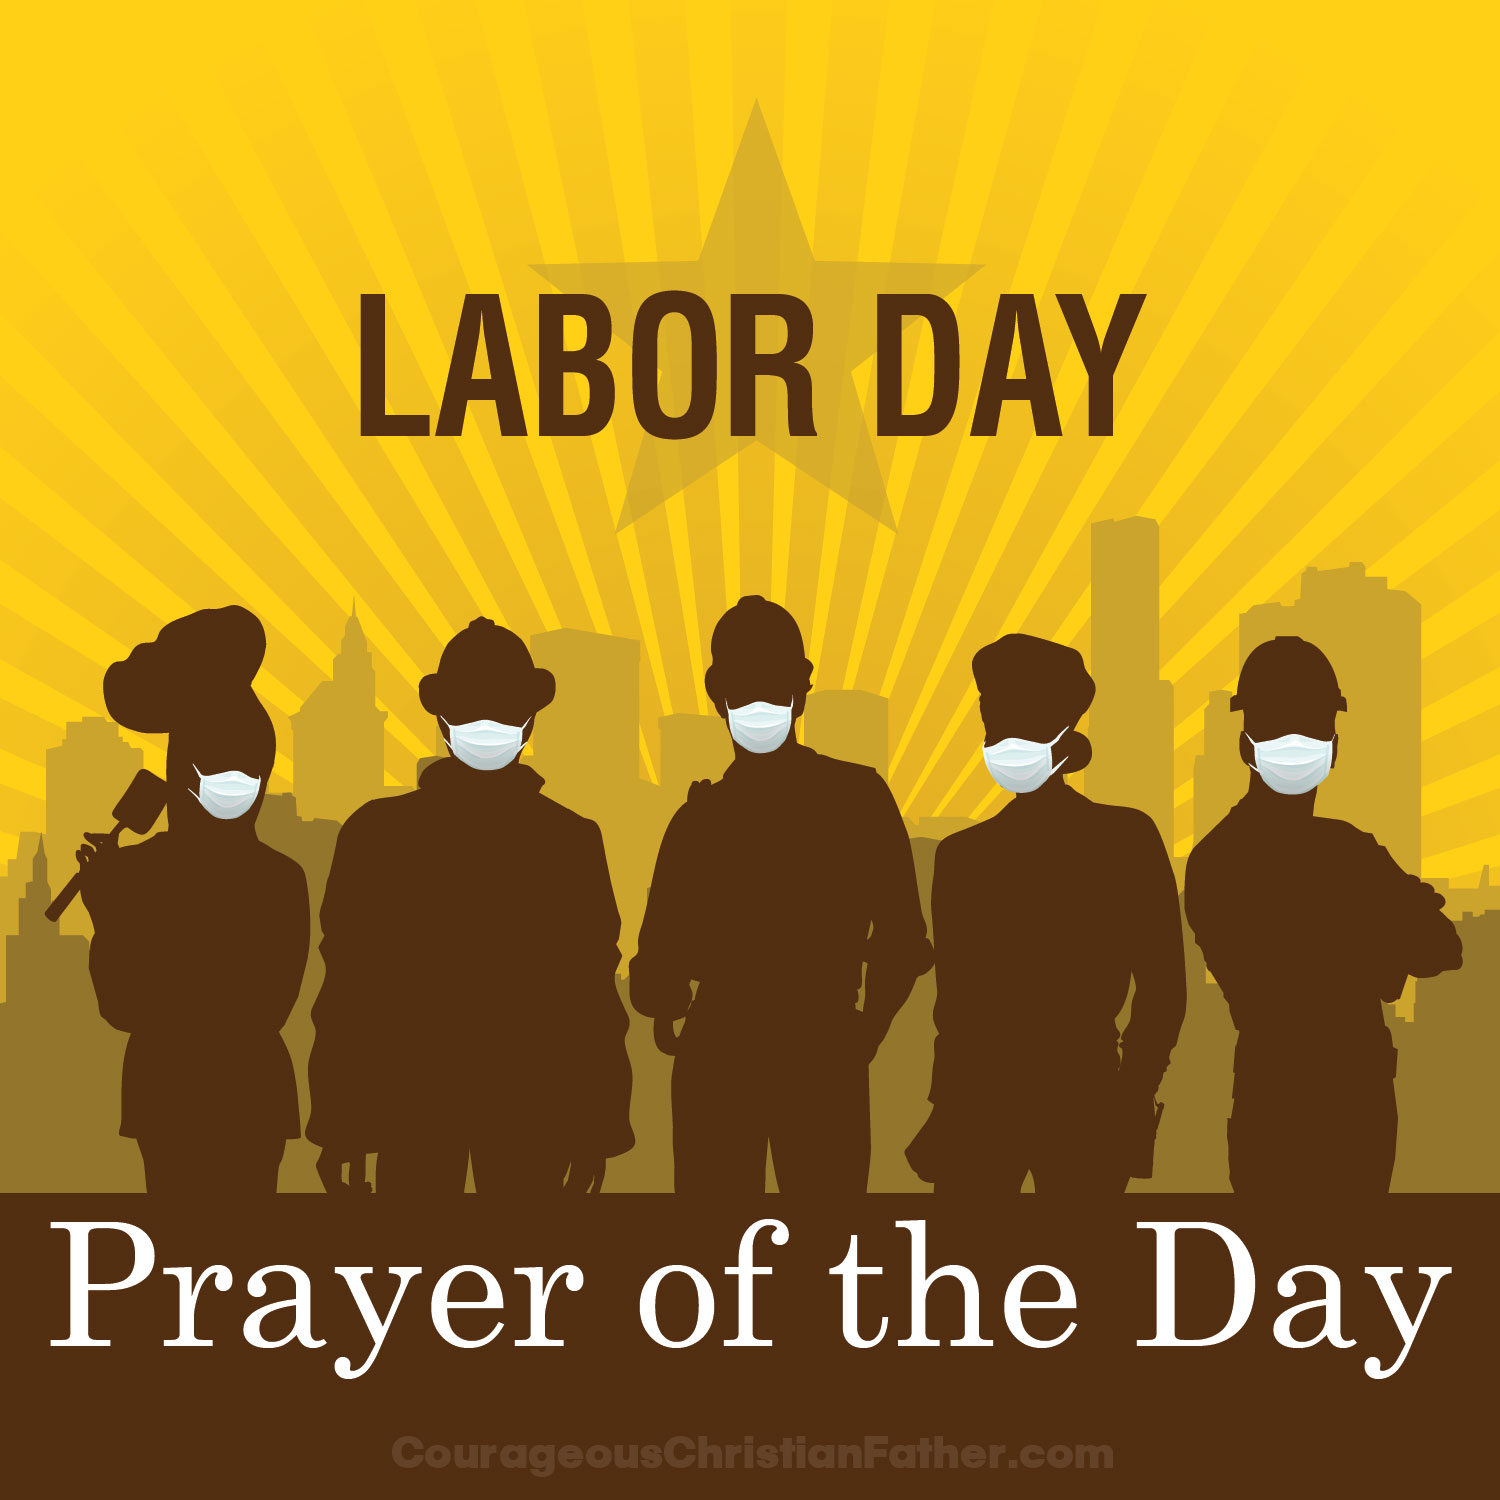 Labor Day Prayer of the Day - Today's prayer of the day is topical, for the Labor Day holiday. #LaborDay #LabourDay